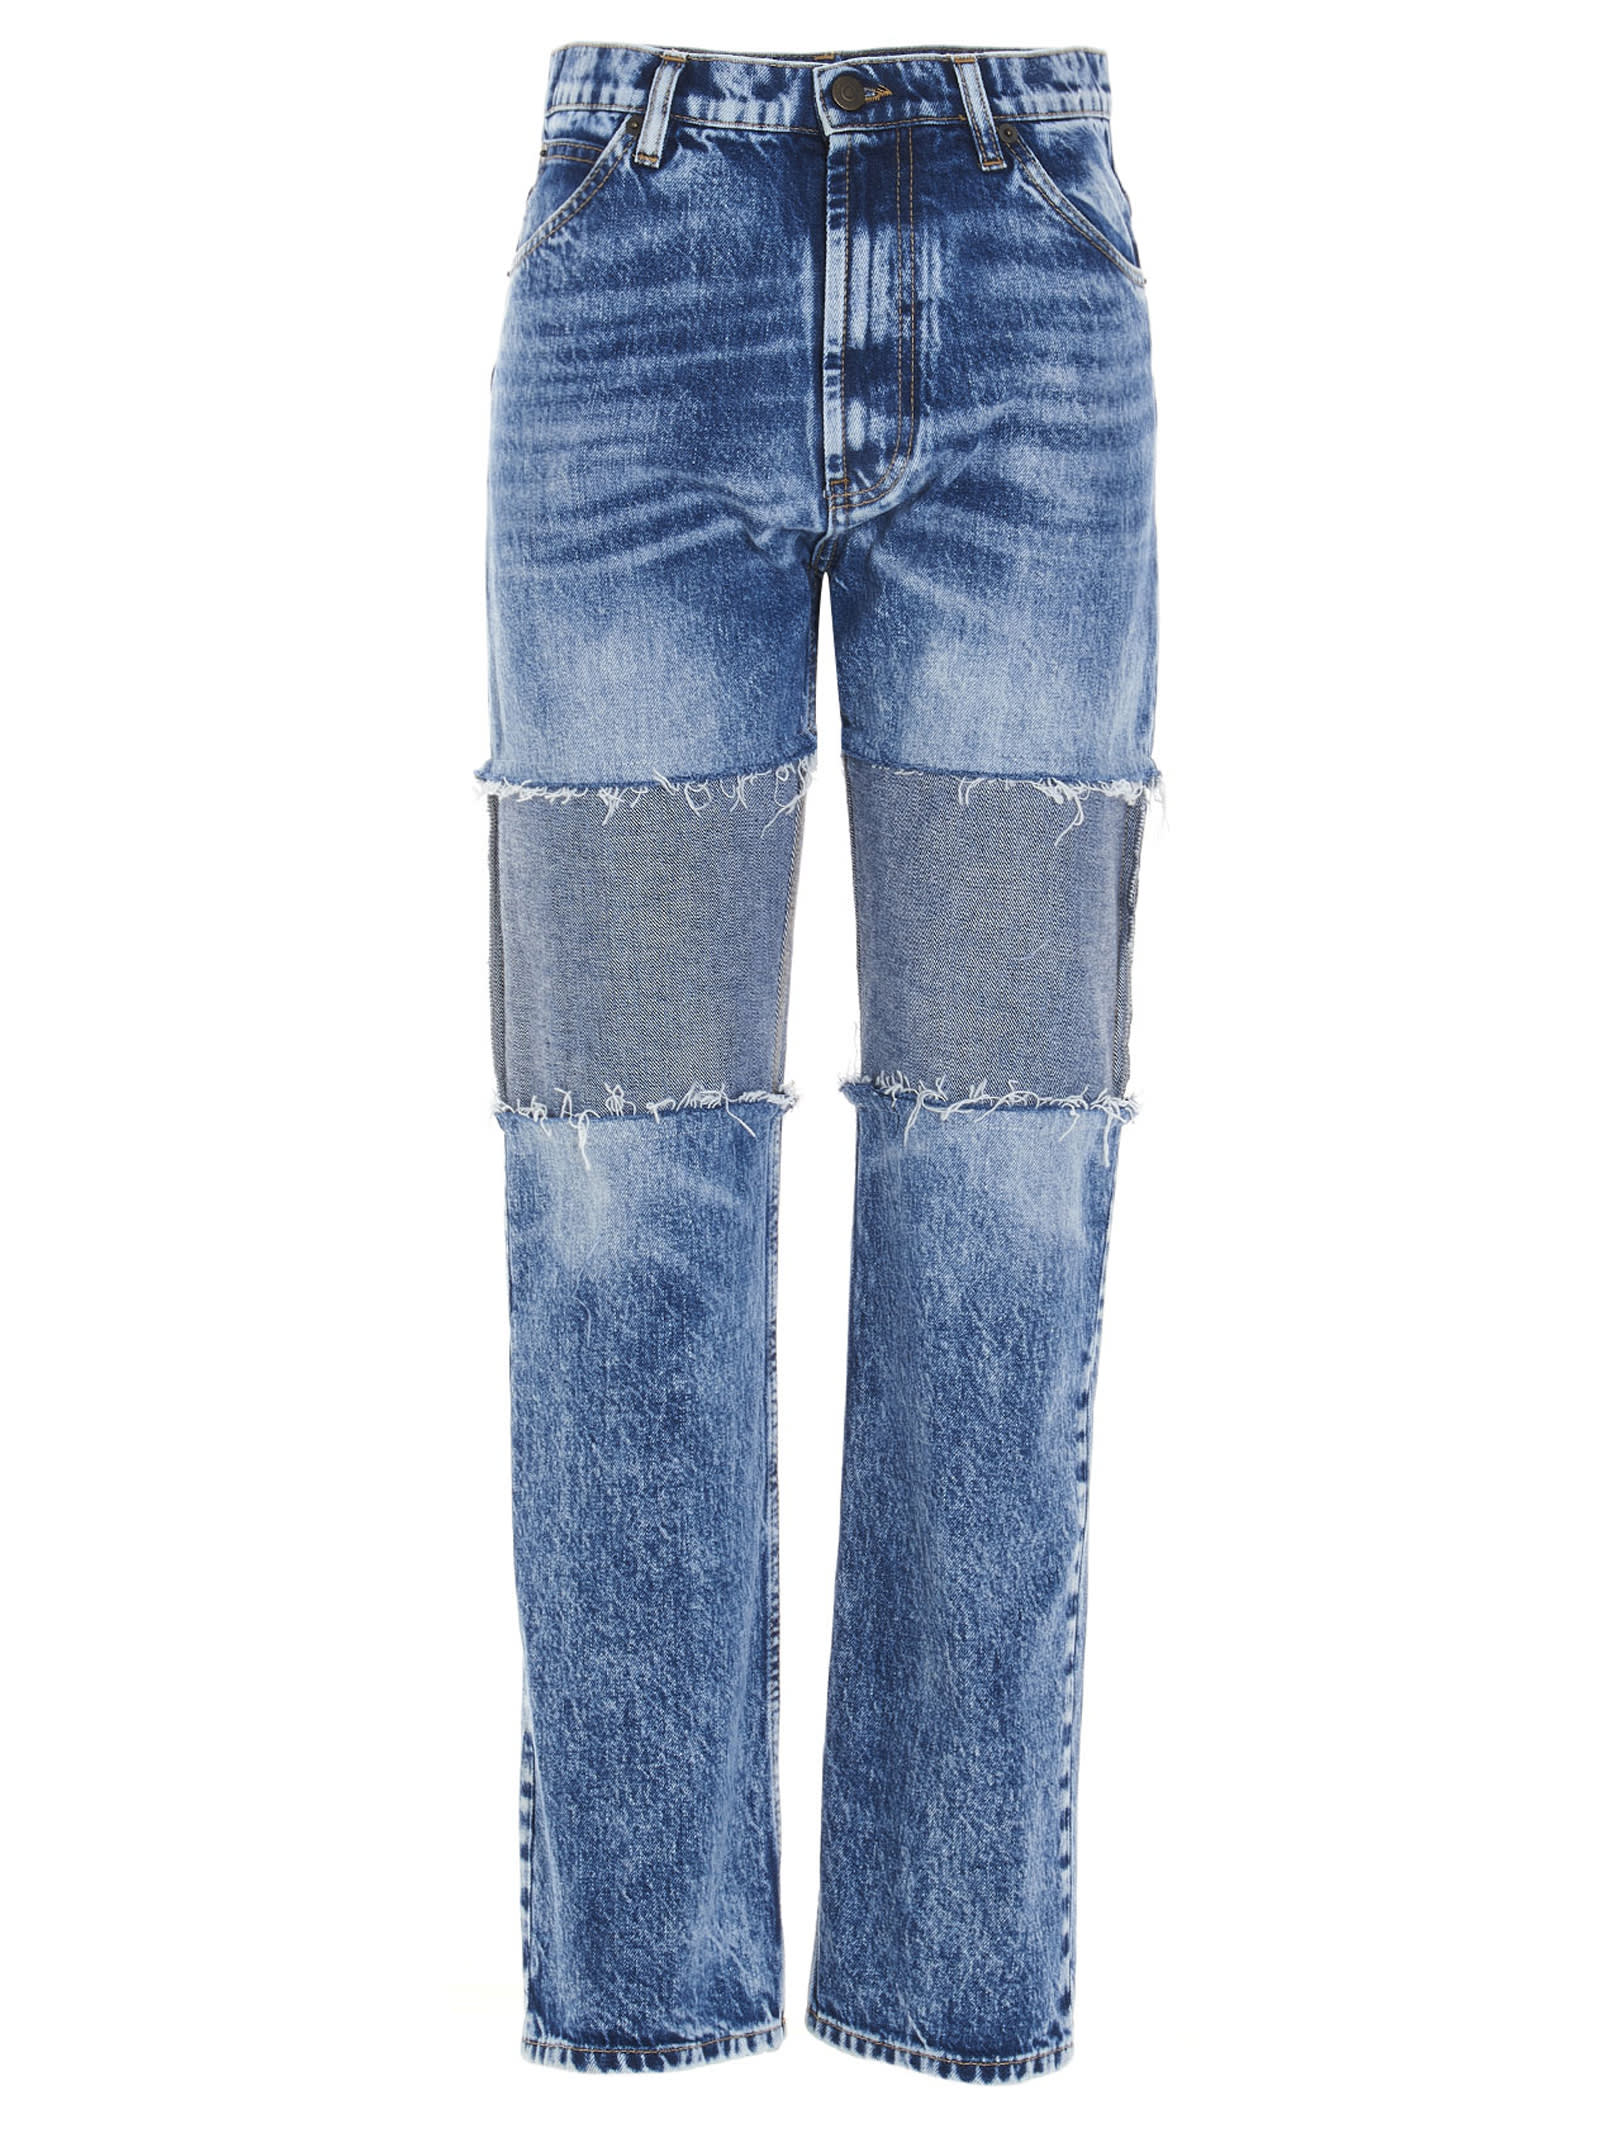 Maison Margiela recycled Patchwork Jeans